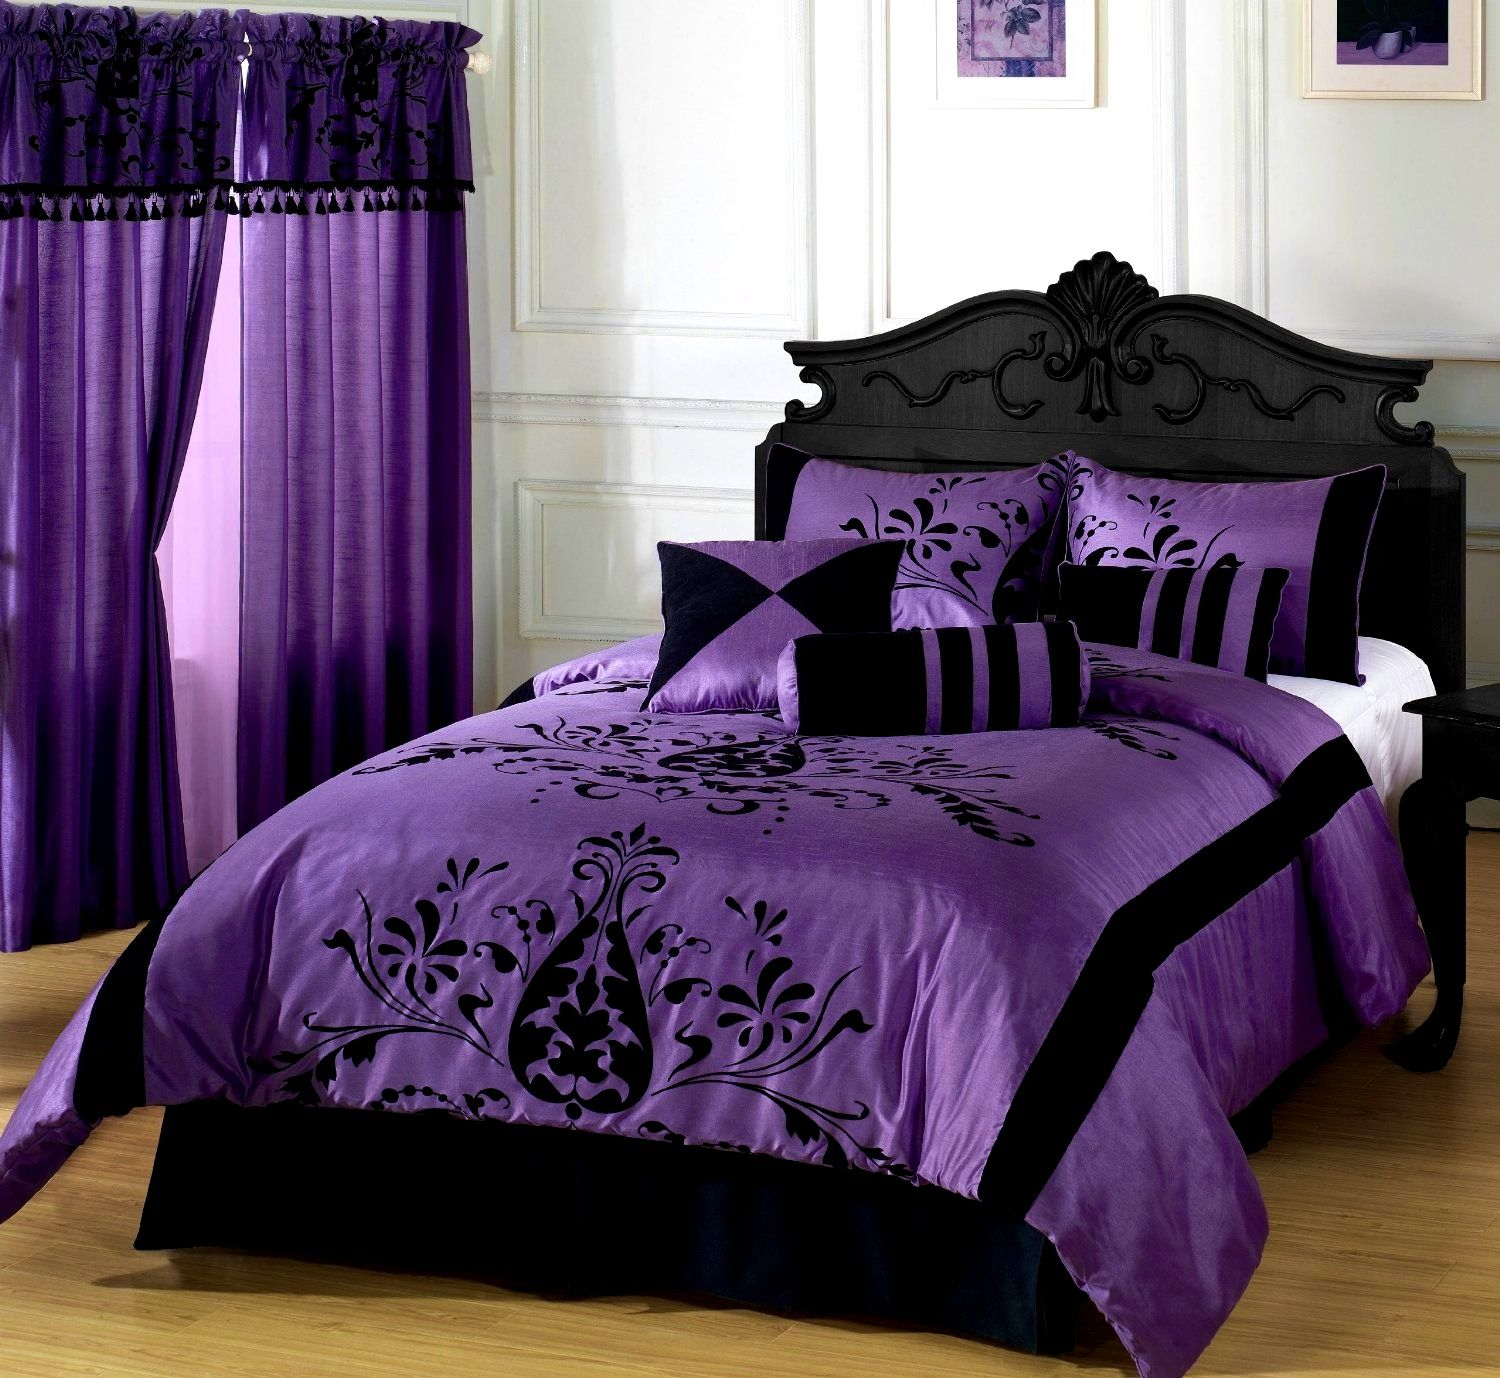 10 Best Black And Purple Bedroom Ideas bedroomcaptivating gothic bedrooms purple and black media design 2022